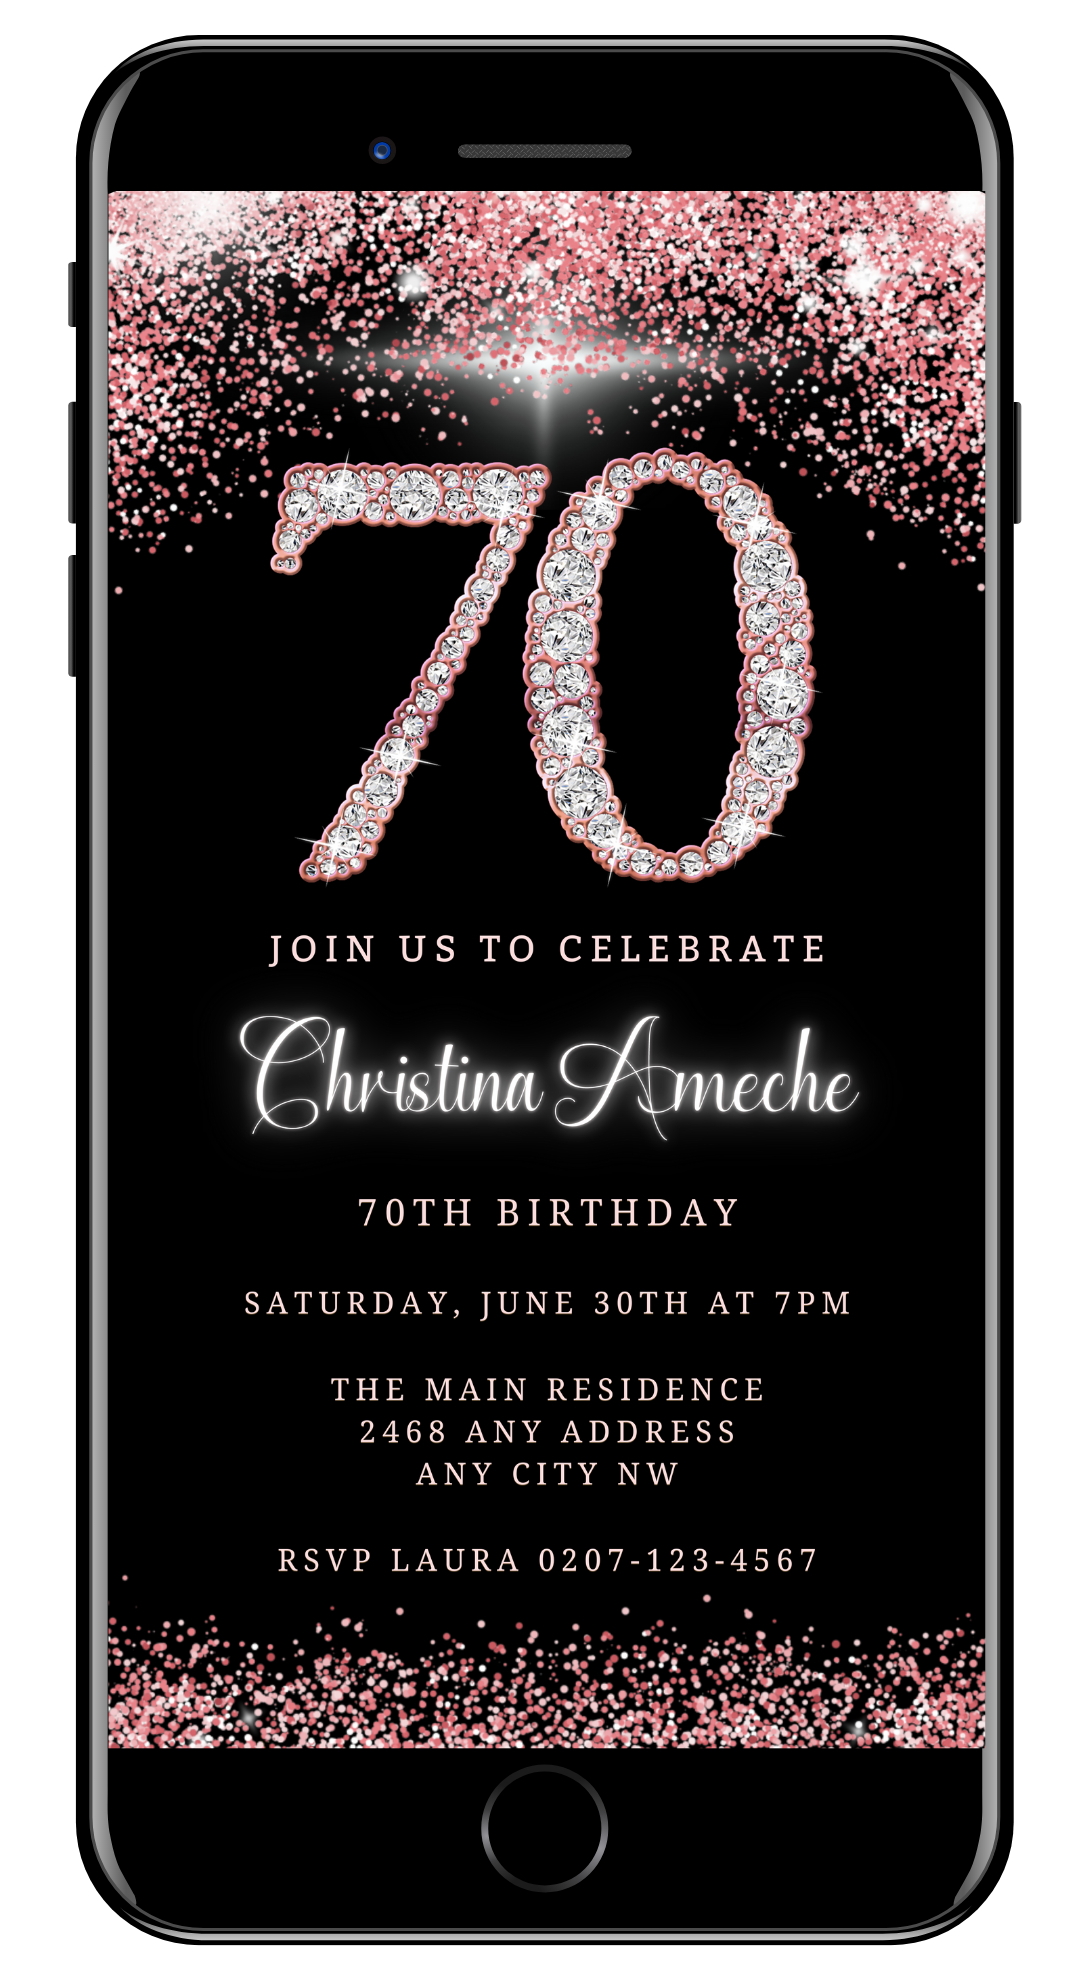 Customisable Digital Rose Gold Diamond Glitter 70th Birthday Evite displayed on a smartphone screen with editable text and design elements for personalisation via Canva.